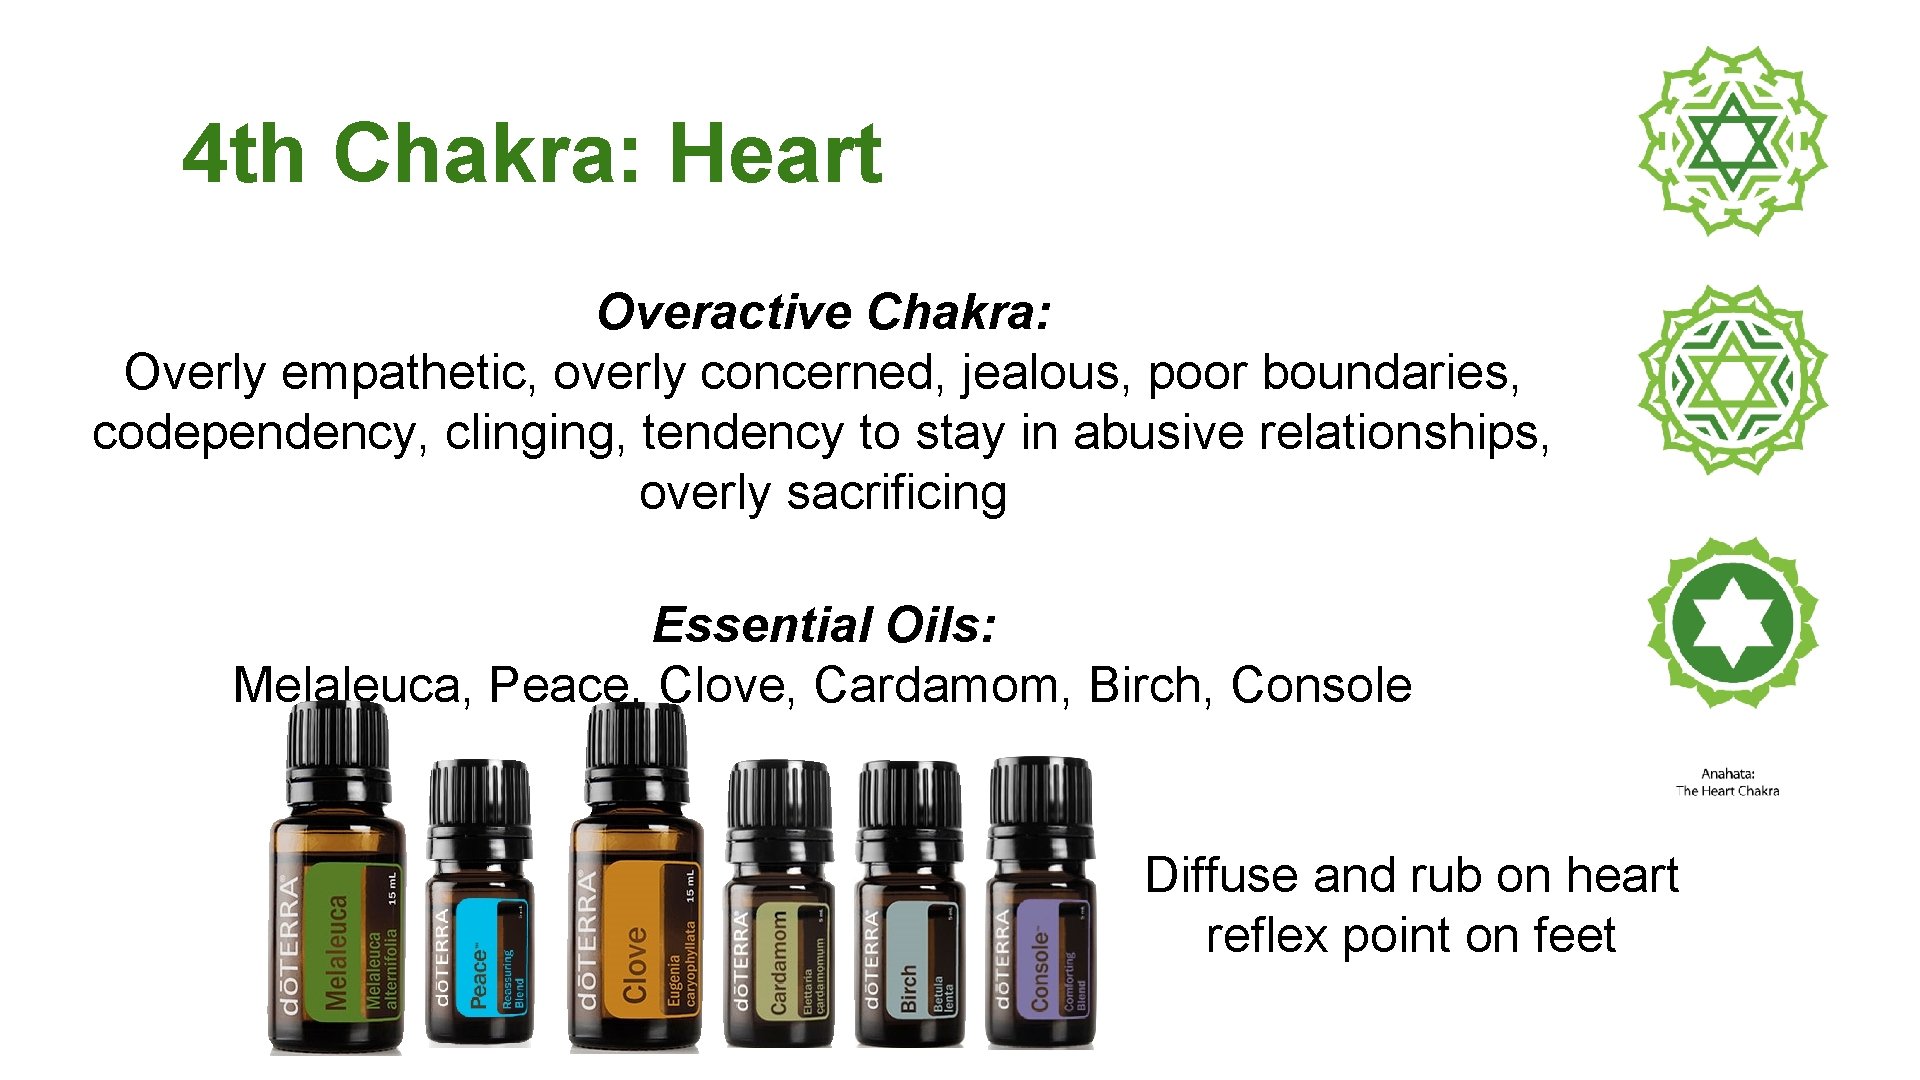 4 th Chakra: Heart Overactive Chakra: Overly empathetic, overly concerned, jealous, poor boundaries, codependency,